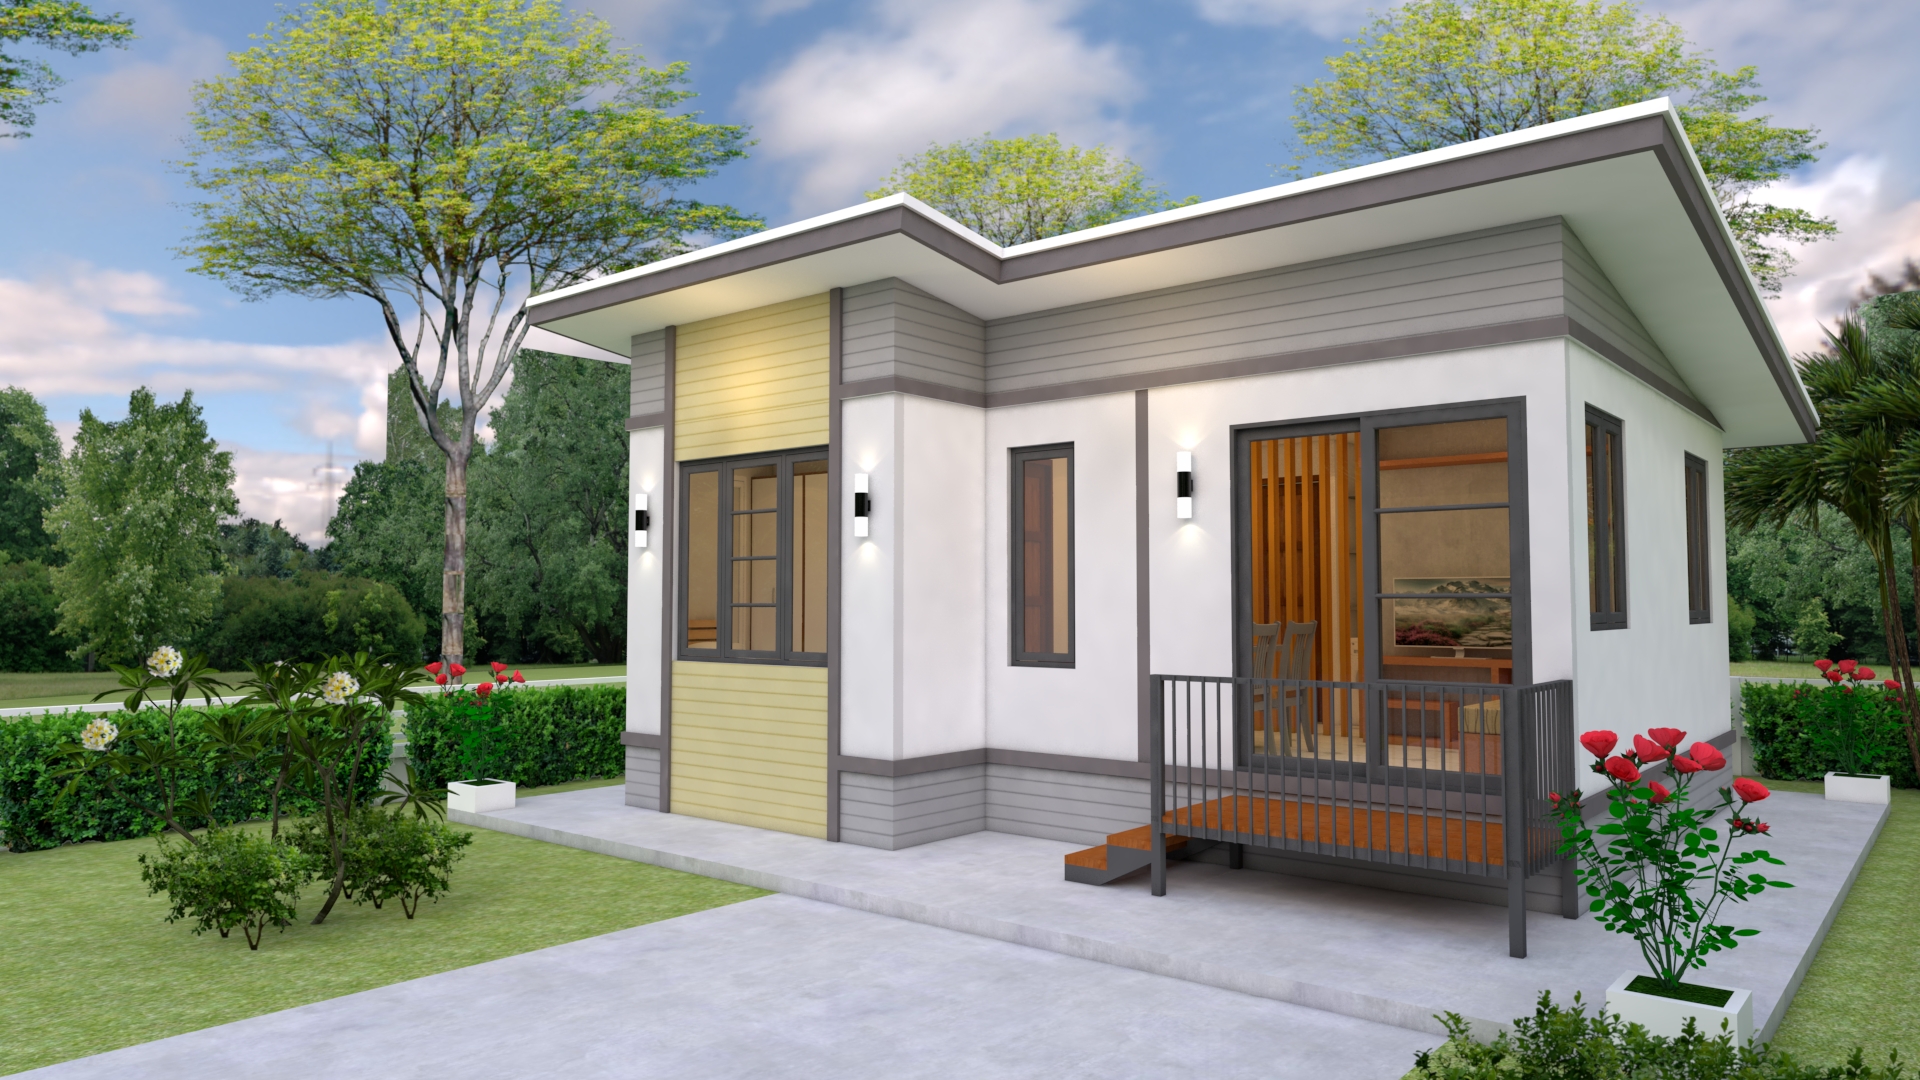 Simple Small House Design 7x6 Meter 23x20 Feet - Pro Home DecorZ